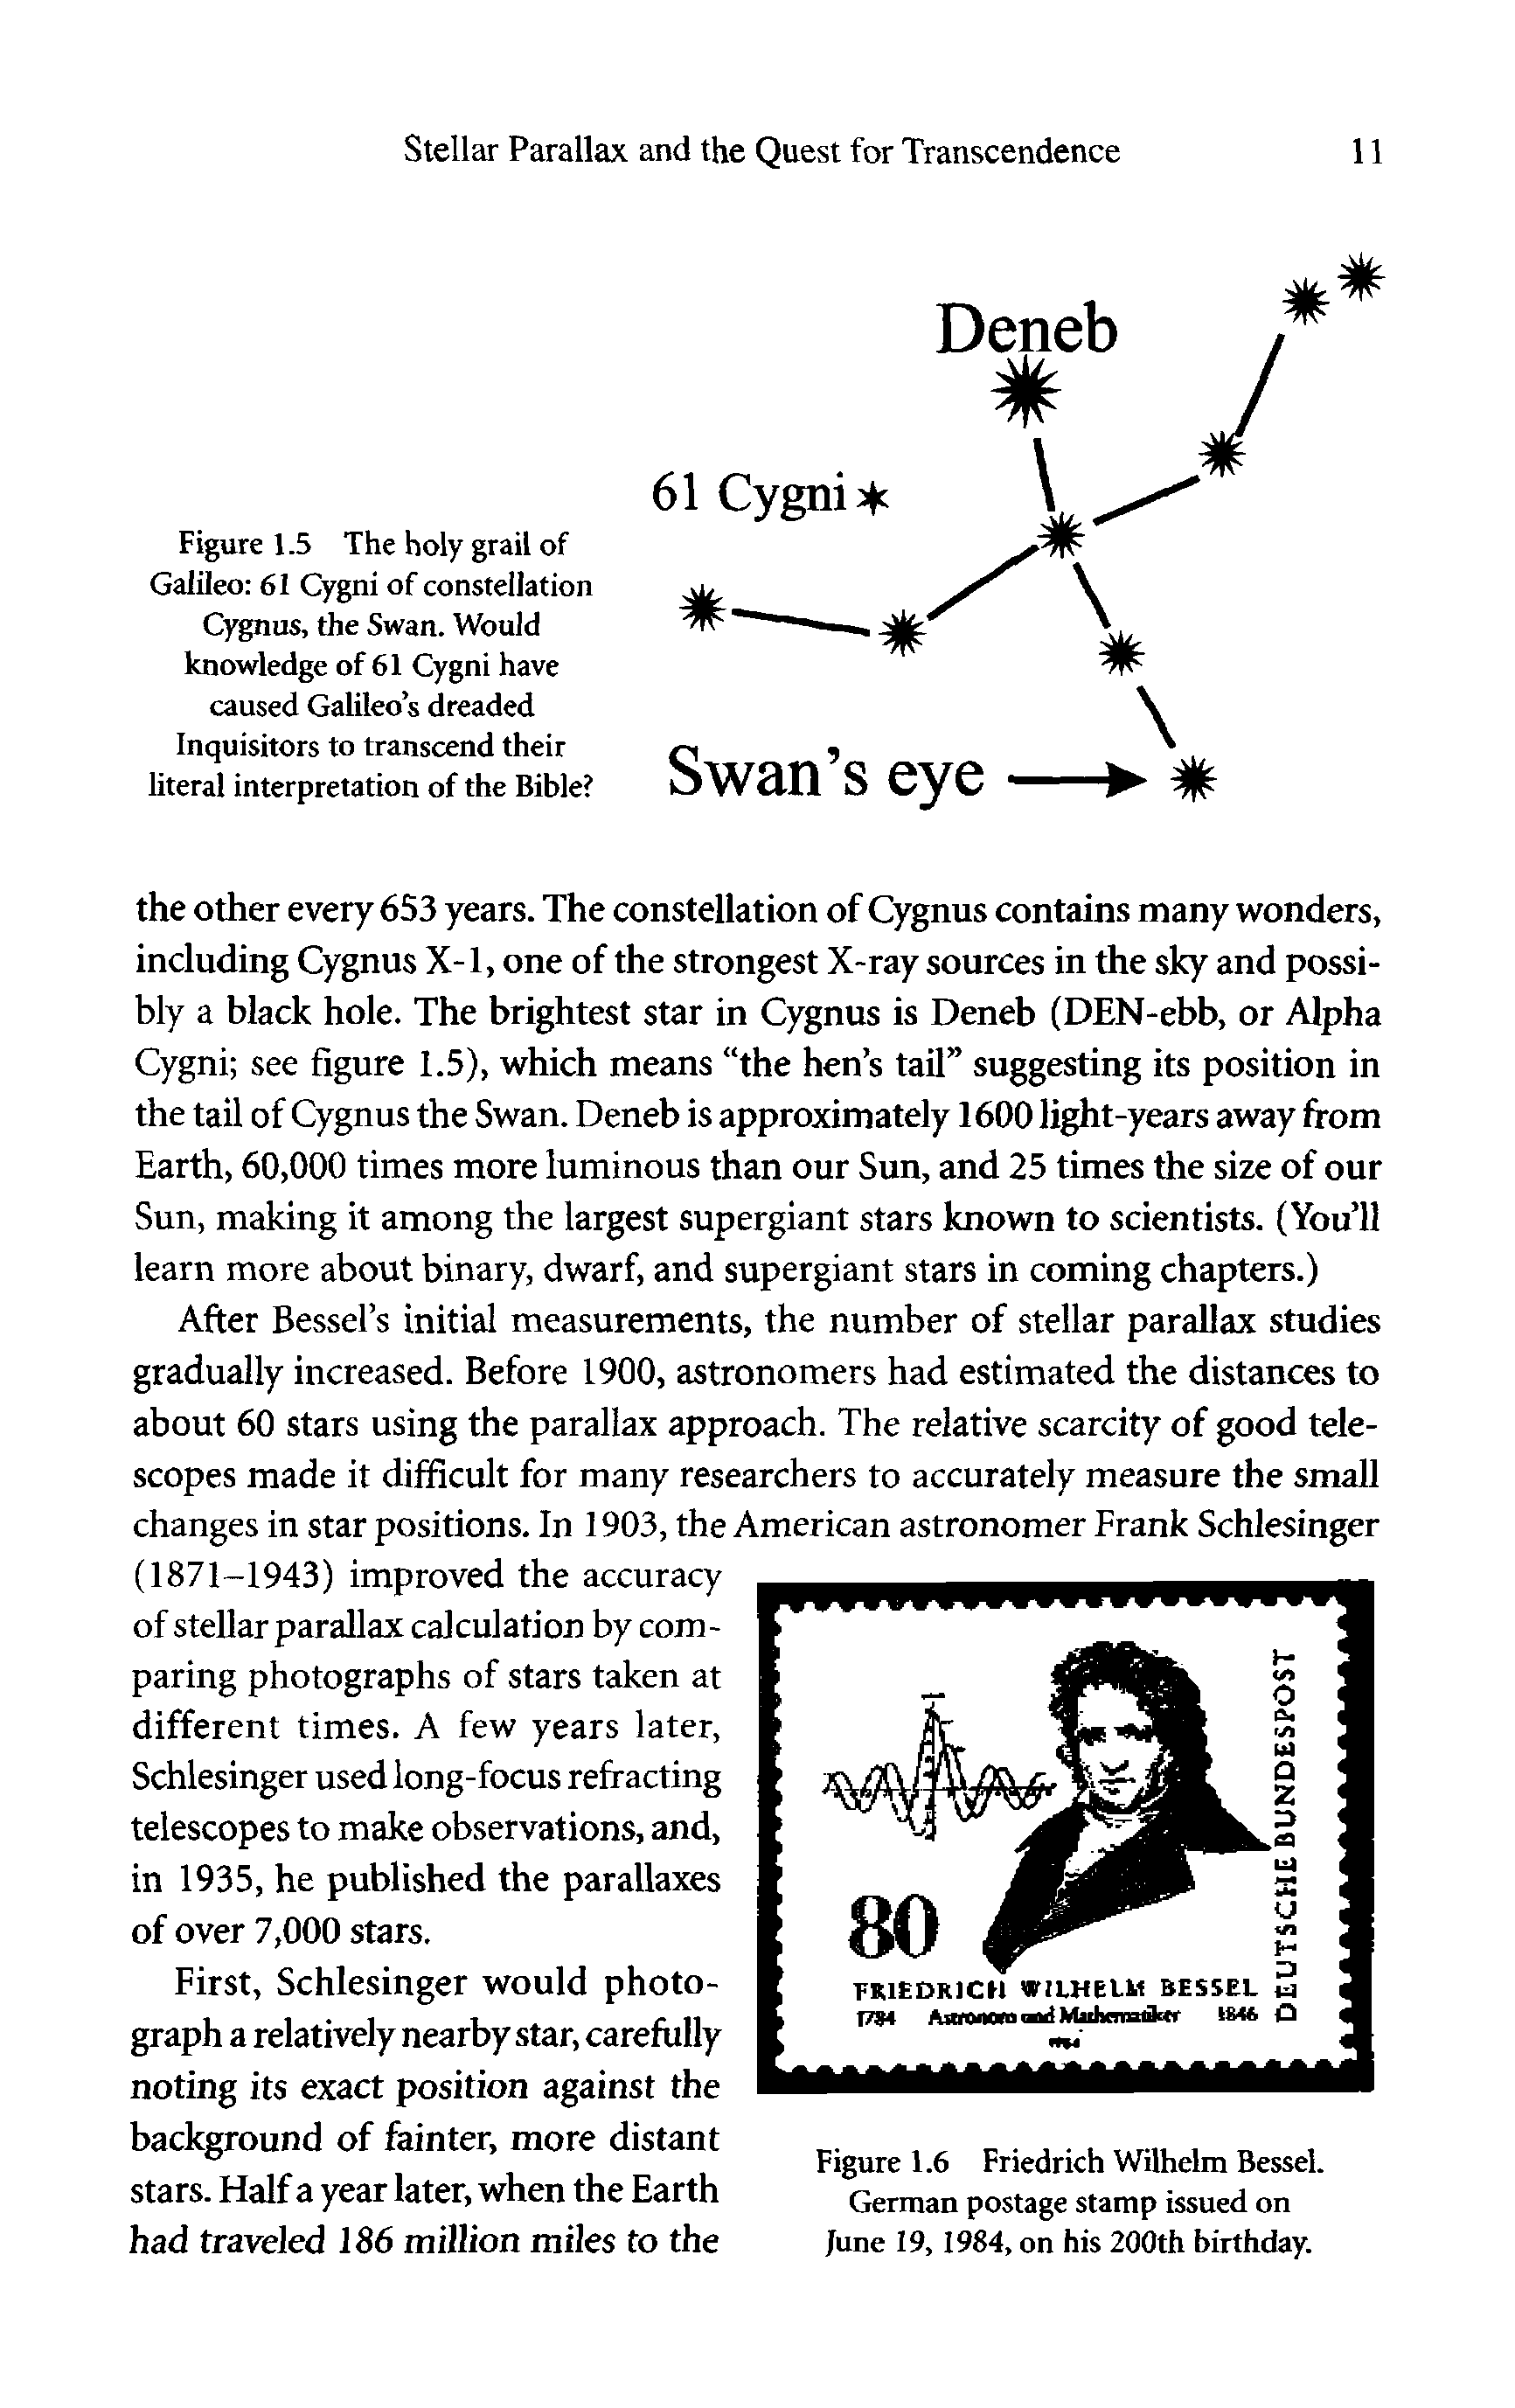 Figure 1.5 The holy grail of Galileo 61 Cygni of constellation Cygnus, the Swan. Would knowledge of 61 Cygni have caused Galileos dreaded Inquisitors to transcend their literal interpretation of the Bible ...